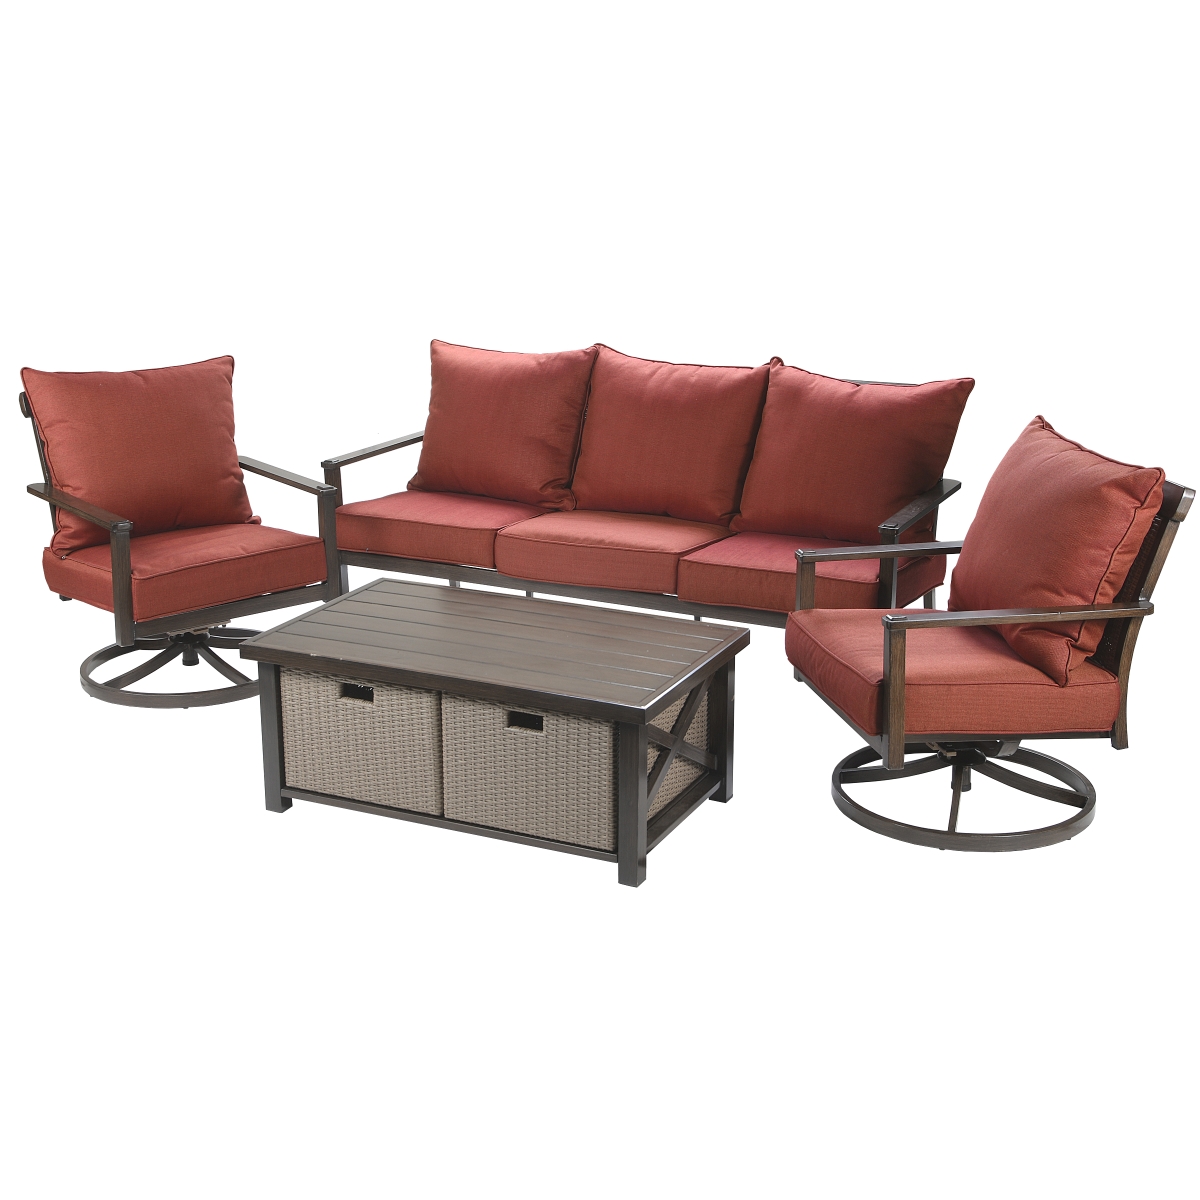 National Tree Do51-dsj10r-4p 77 In. All Weather Pe Wicker Furniture Set, Brown - 4 Piece